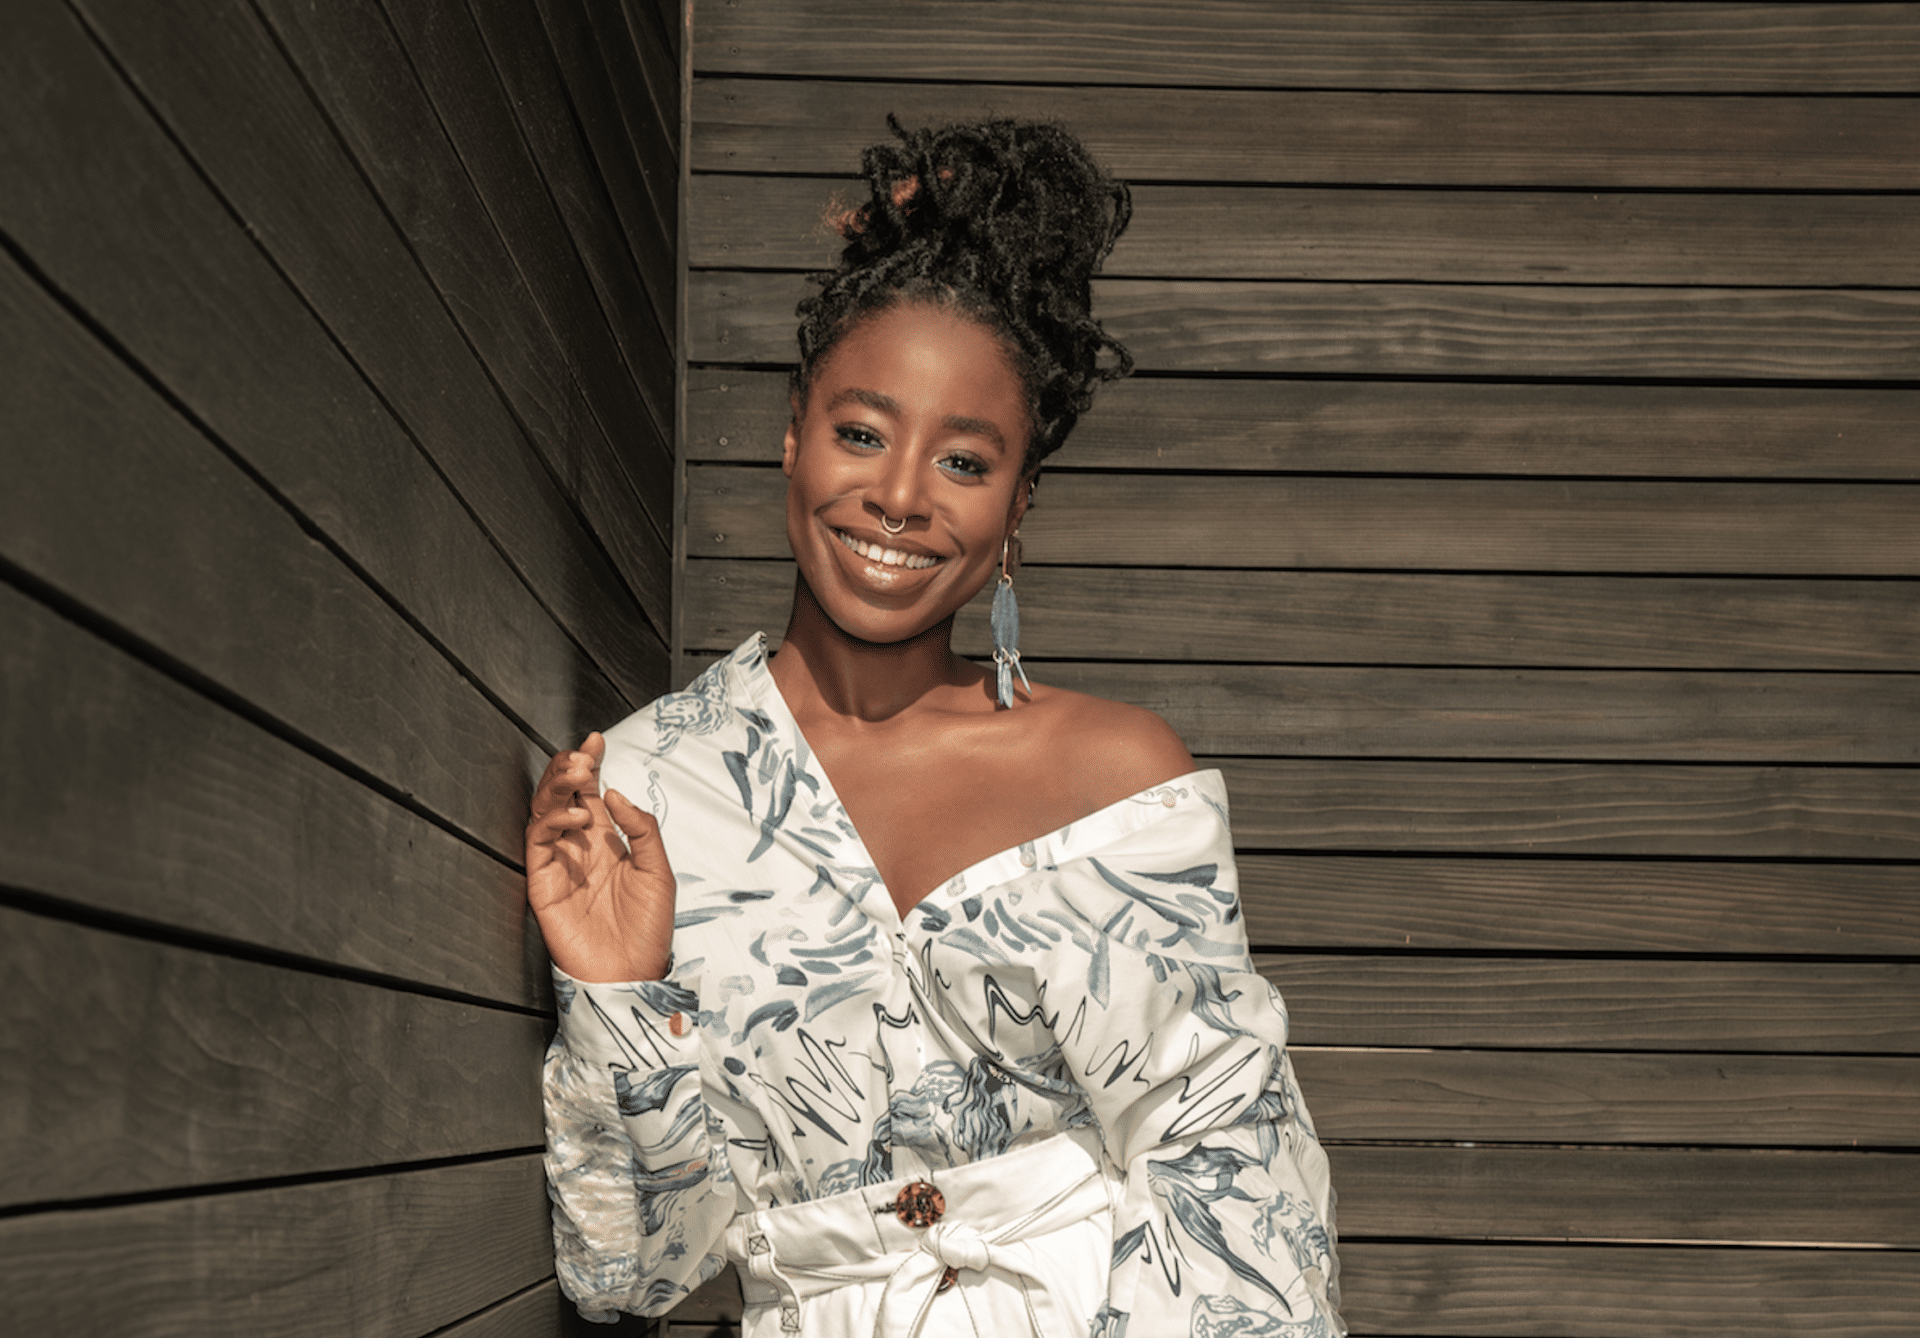 ‘Killing Eve’s’ Kirby Howell-Baptiste Says Her Hollywood Journey Has Been A ‘Surprise’